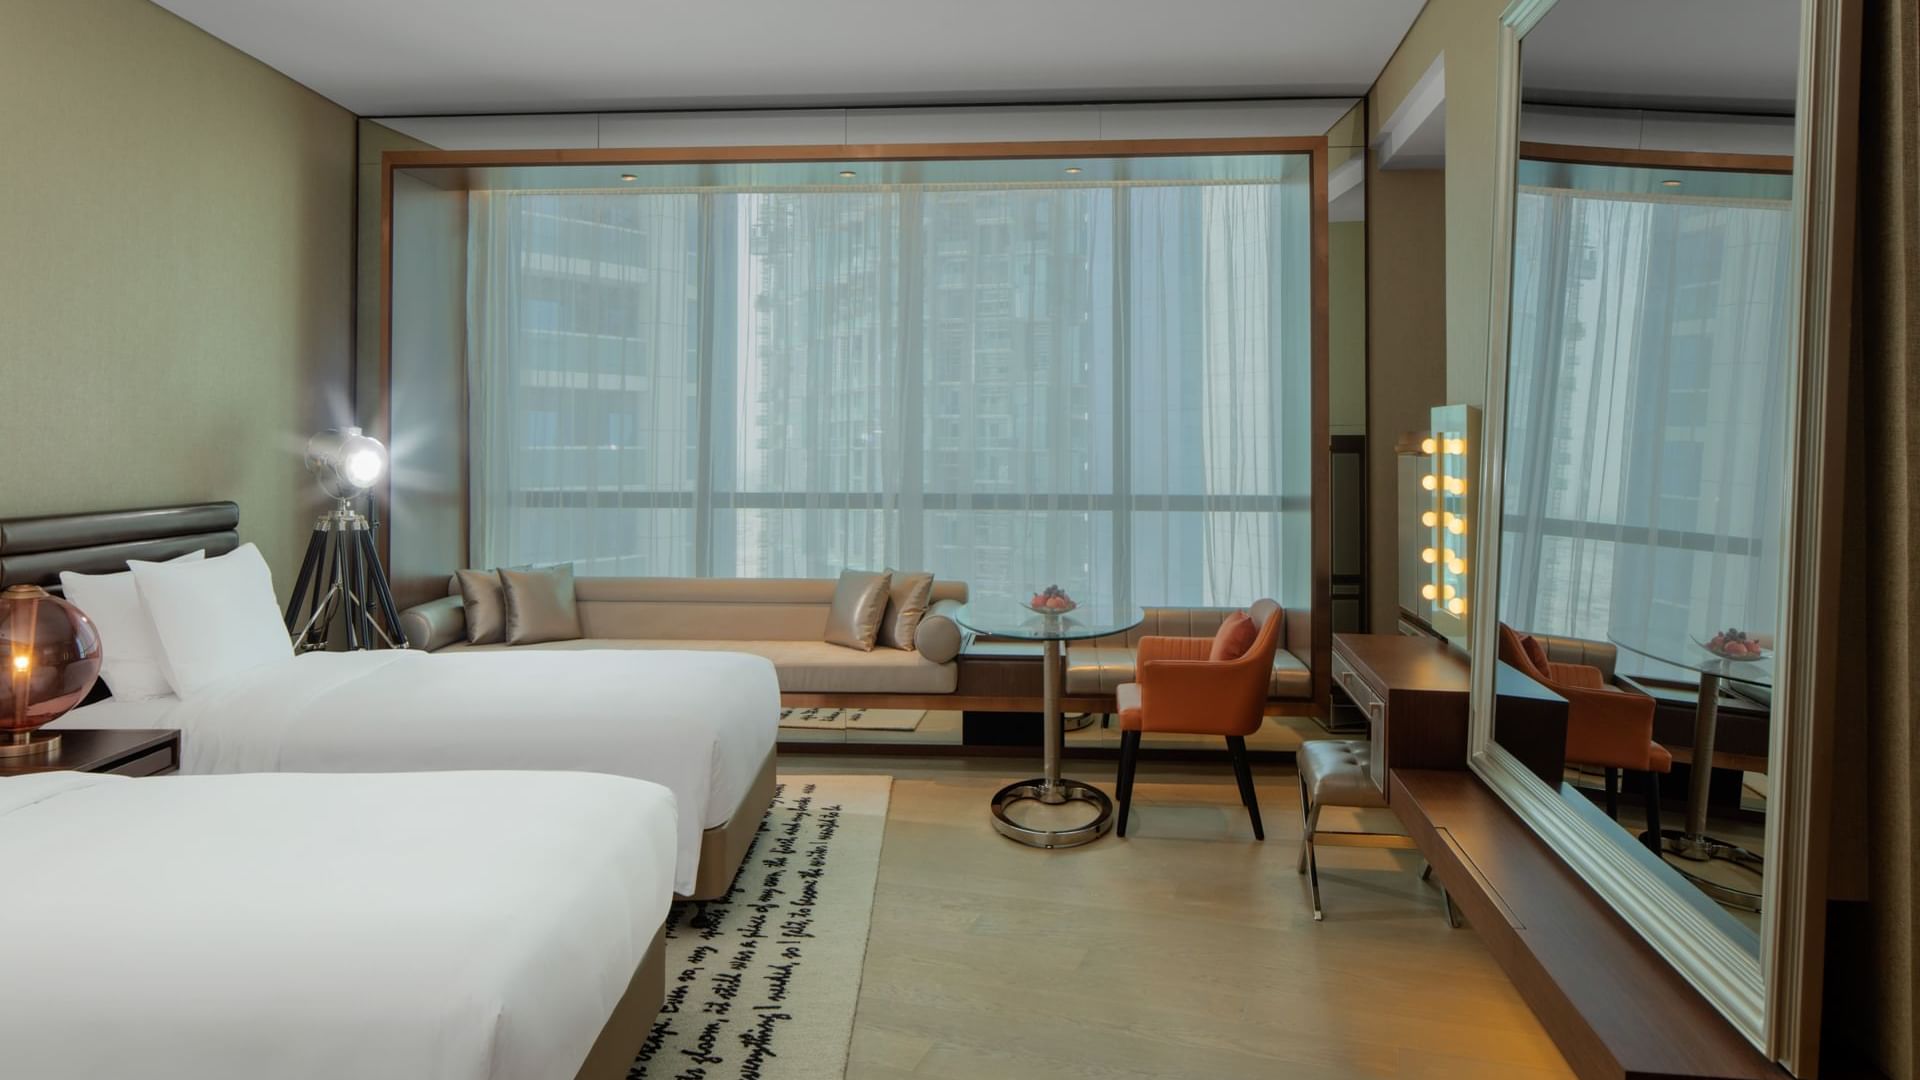 Scene Room with a Downtown View at Paramount Hotel Dubai